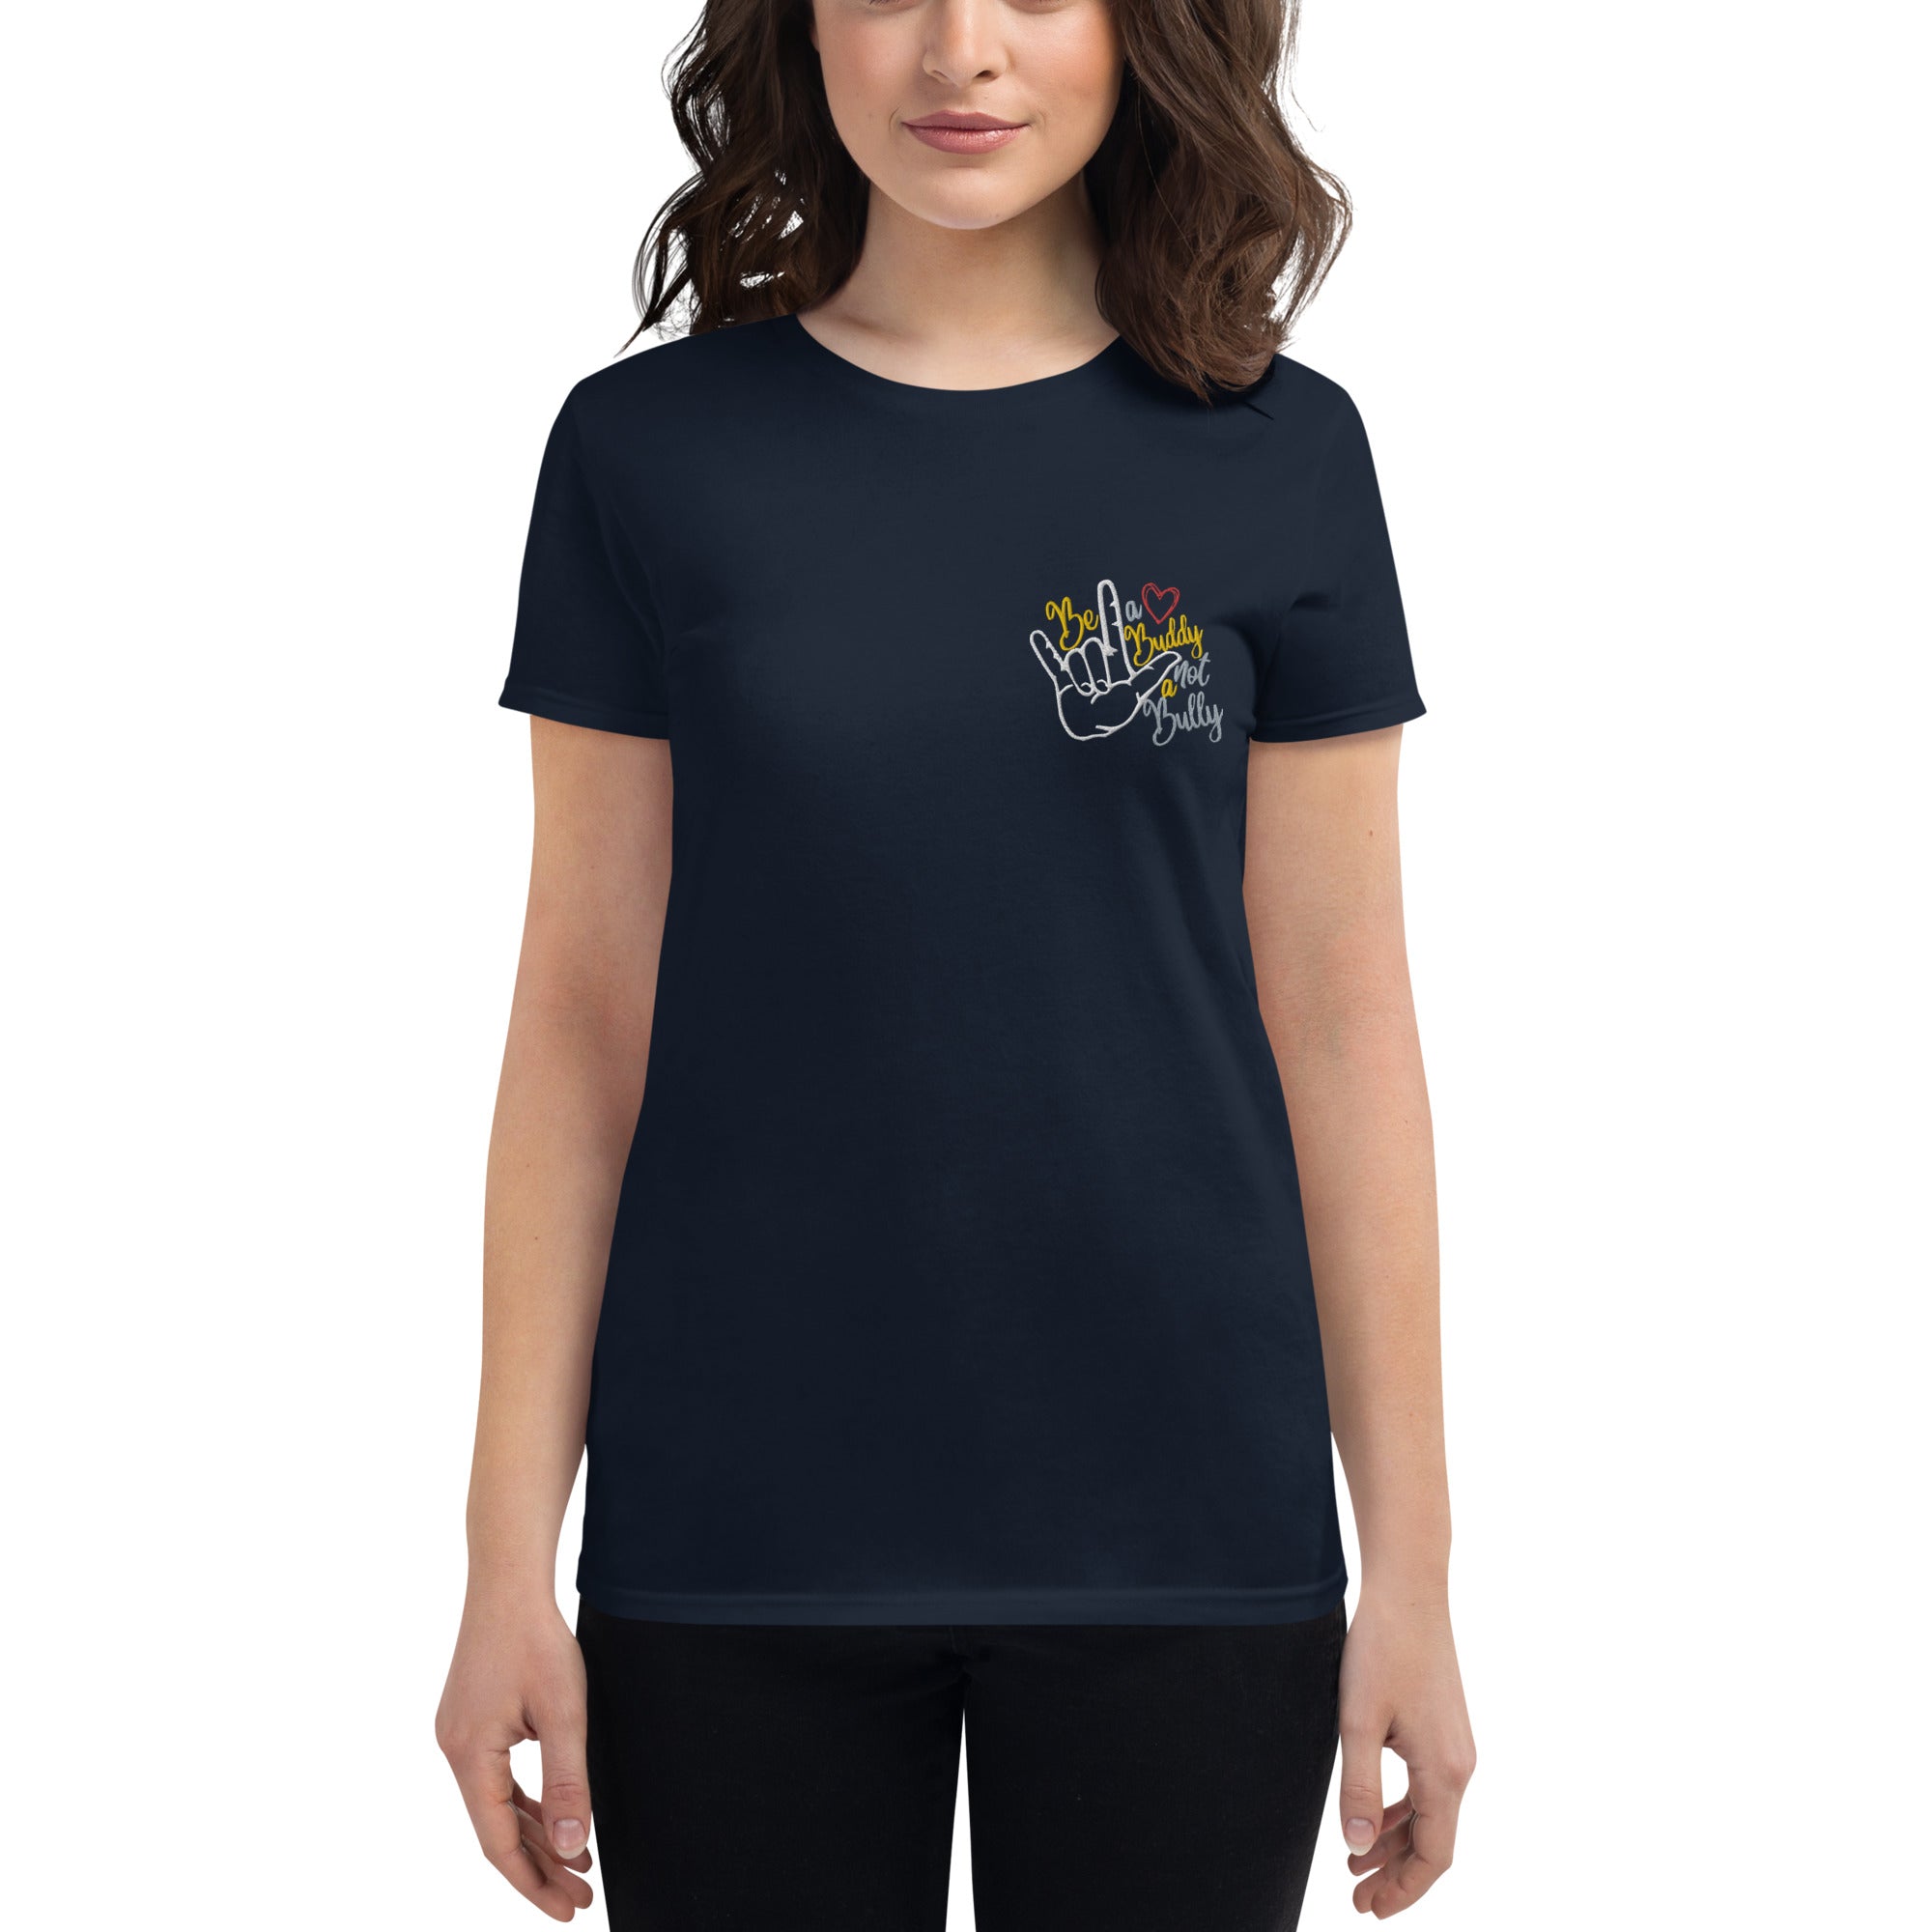 Be a Buddy Not a Bully Embroidered Women's T-shirt